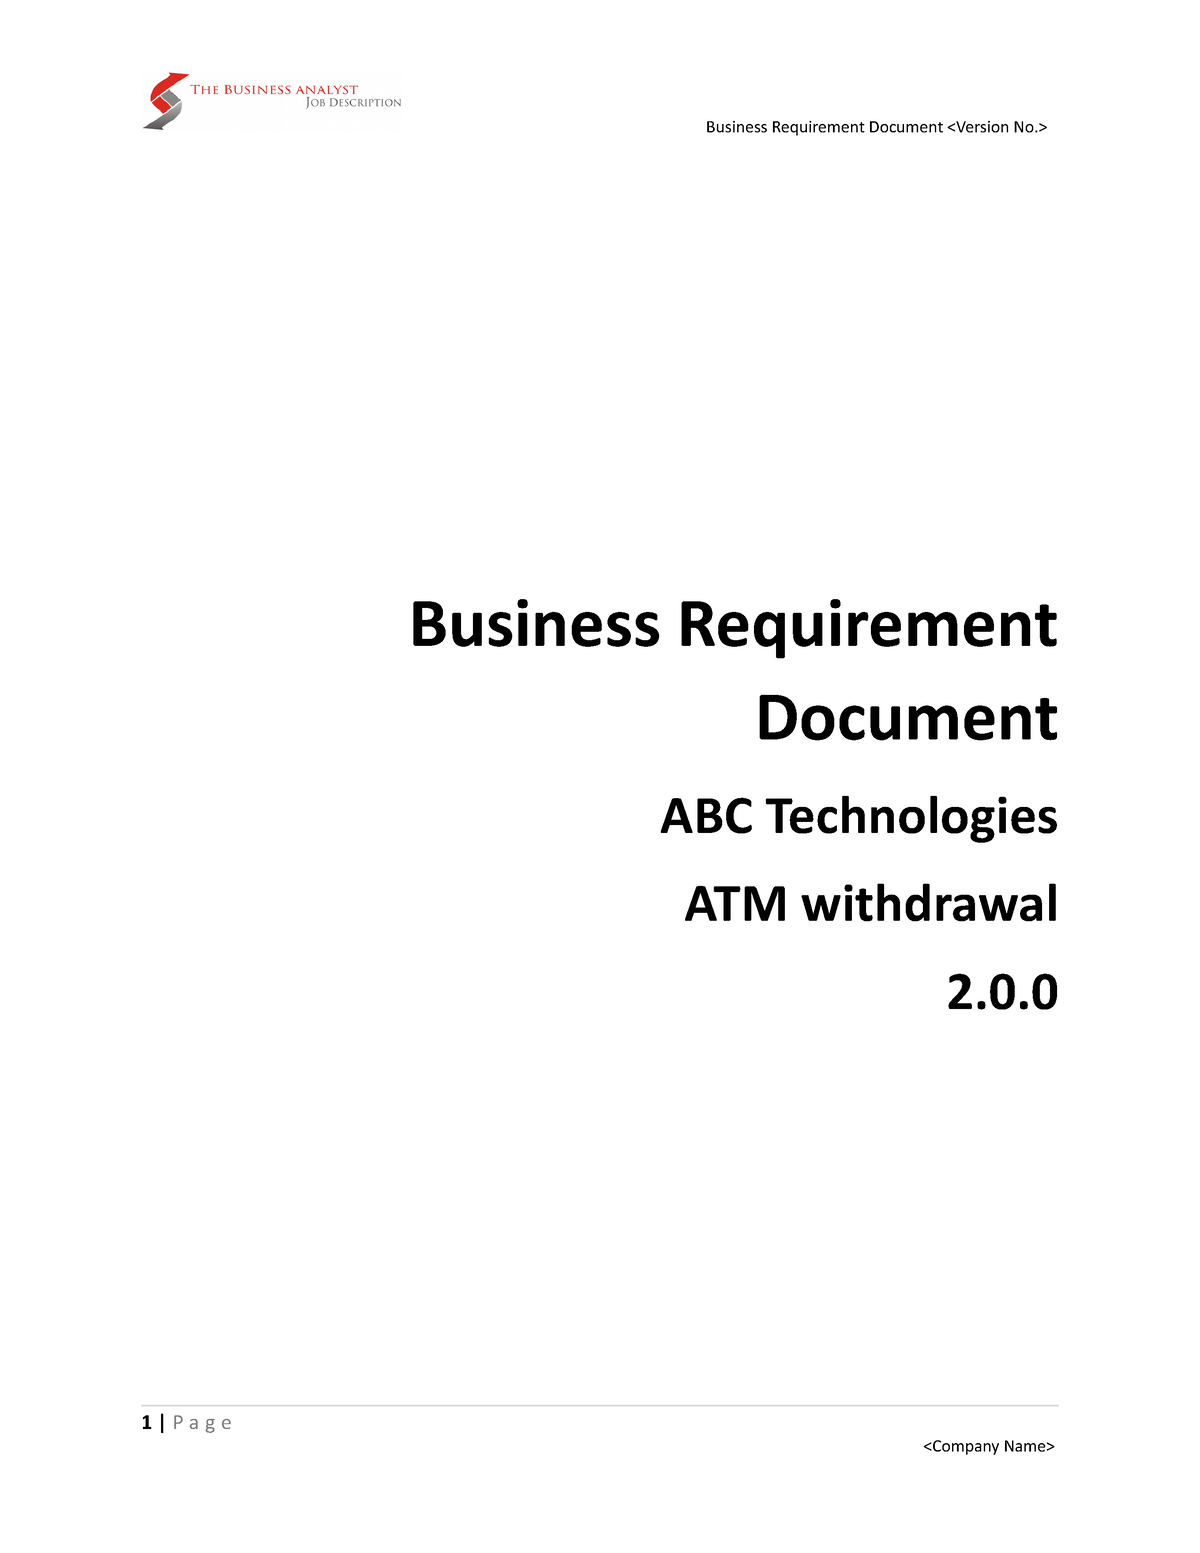 Business Requirement Document Brd Business Requirement Document Abc Technologies Atm 8044